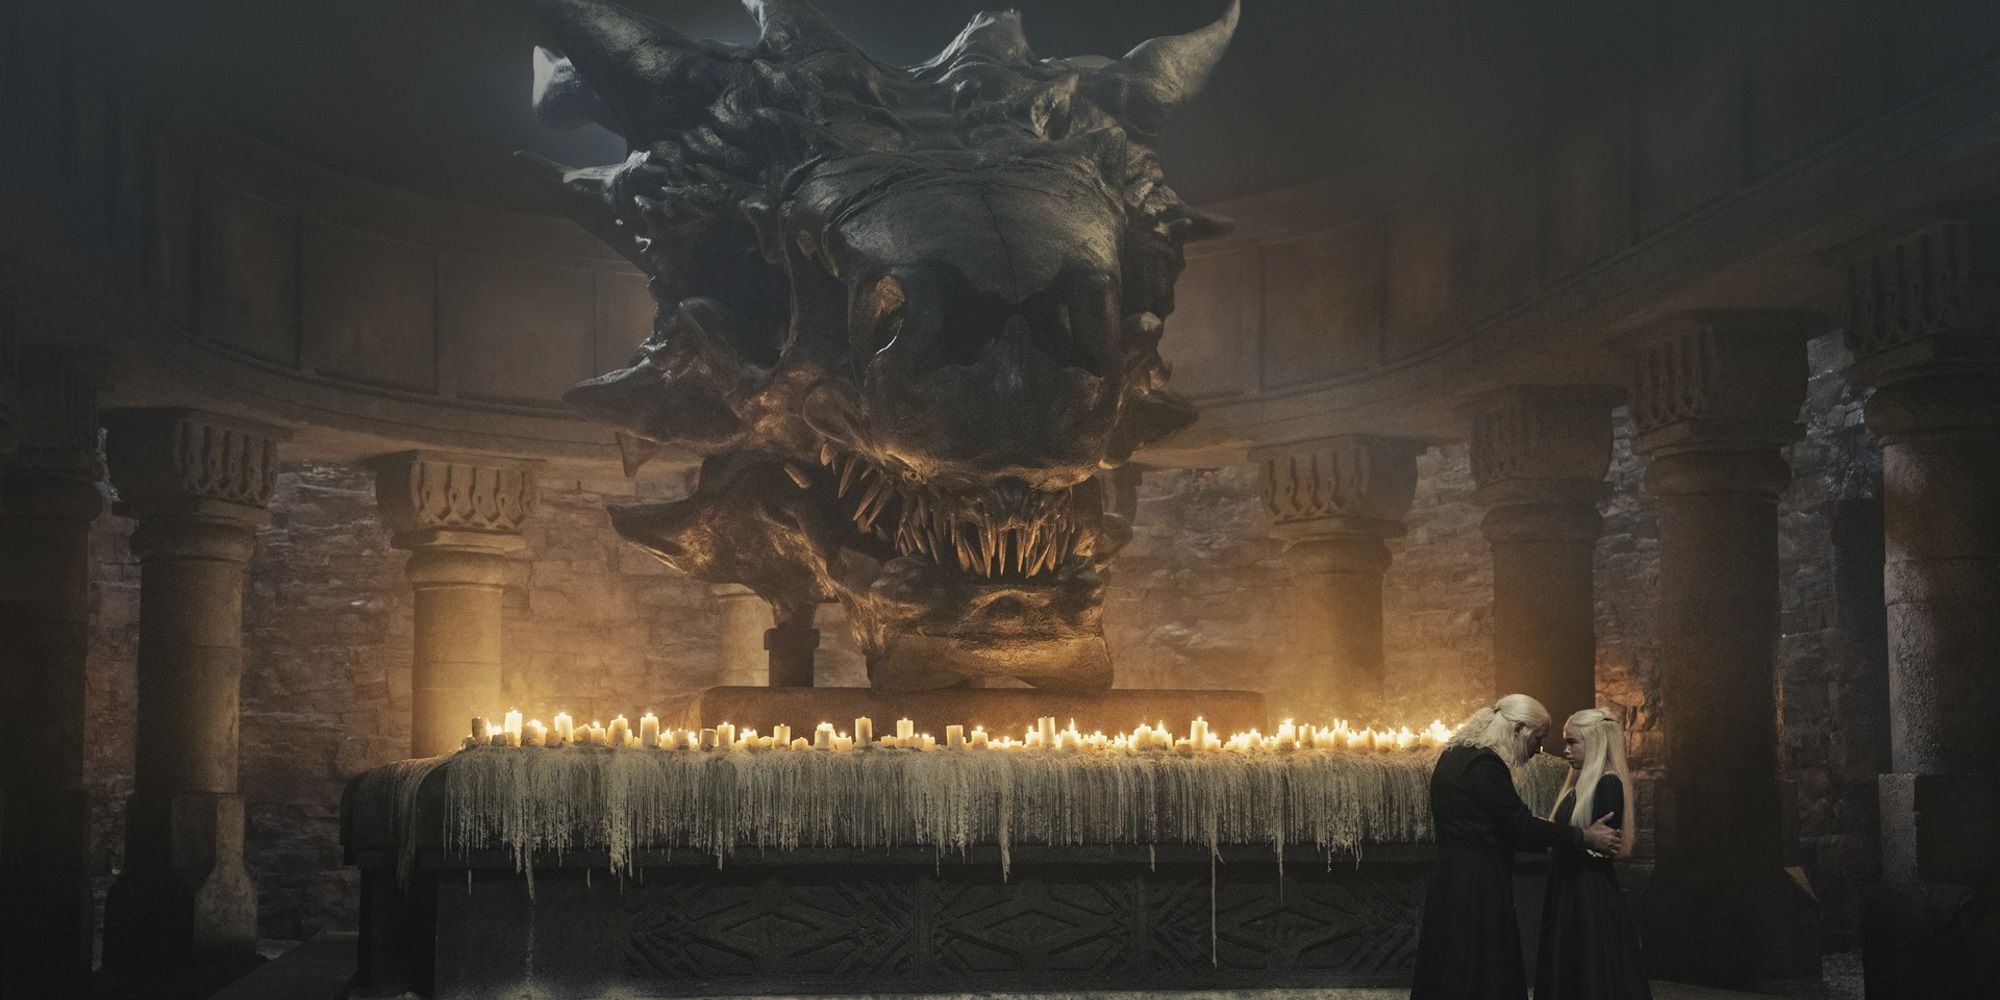 King Viserys and Rhaenyra talk in front of candles in House of the Dragon